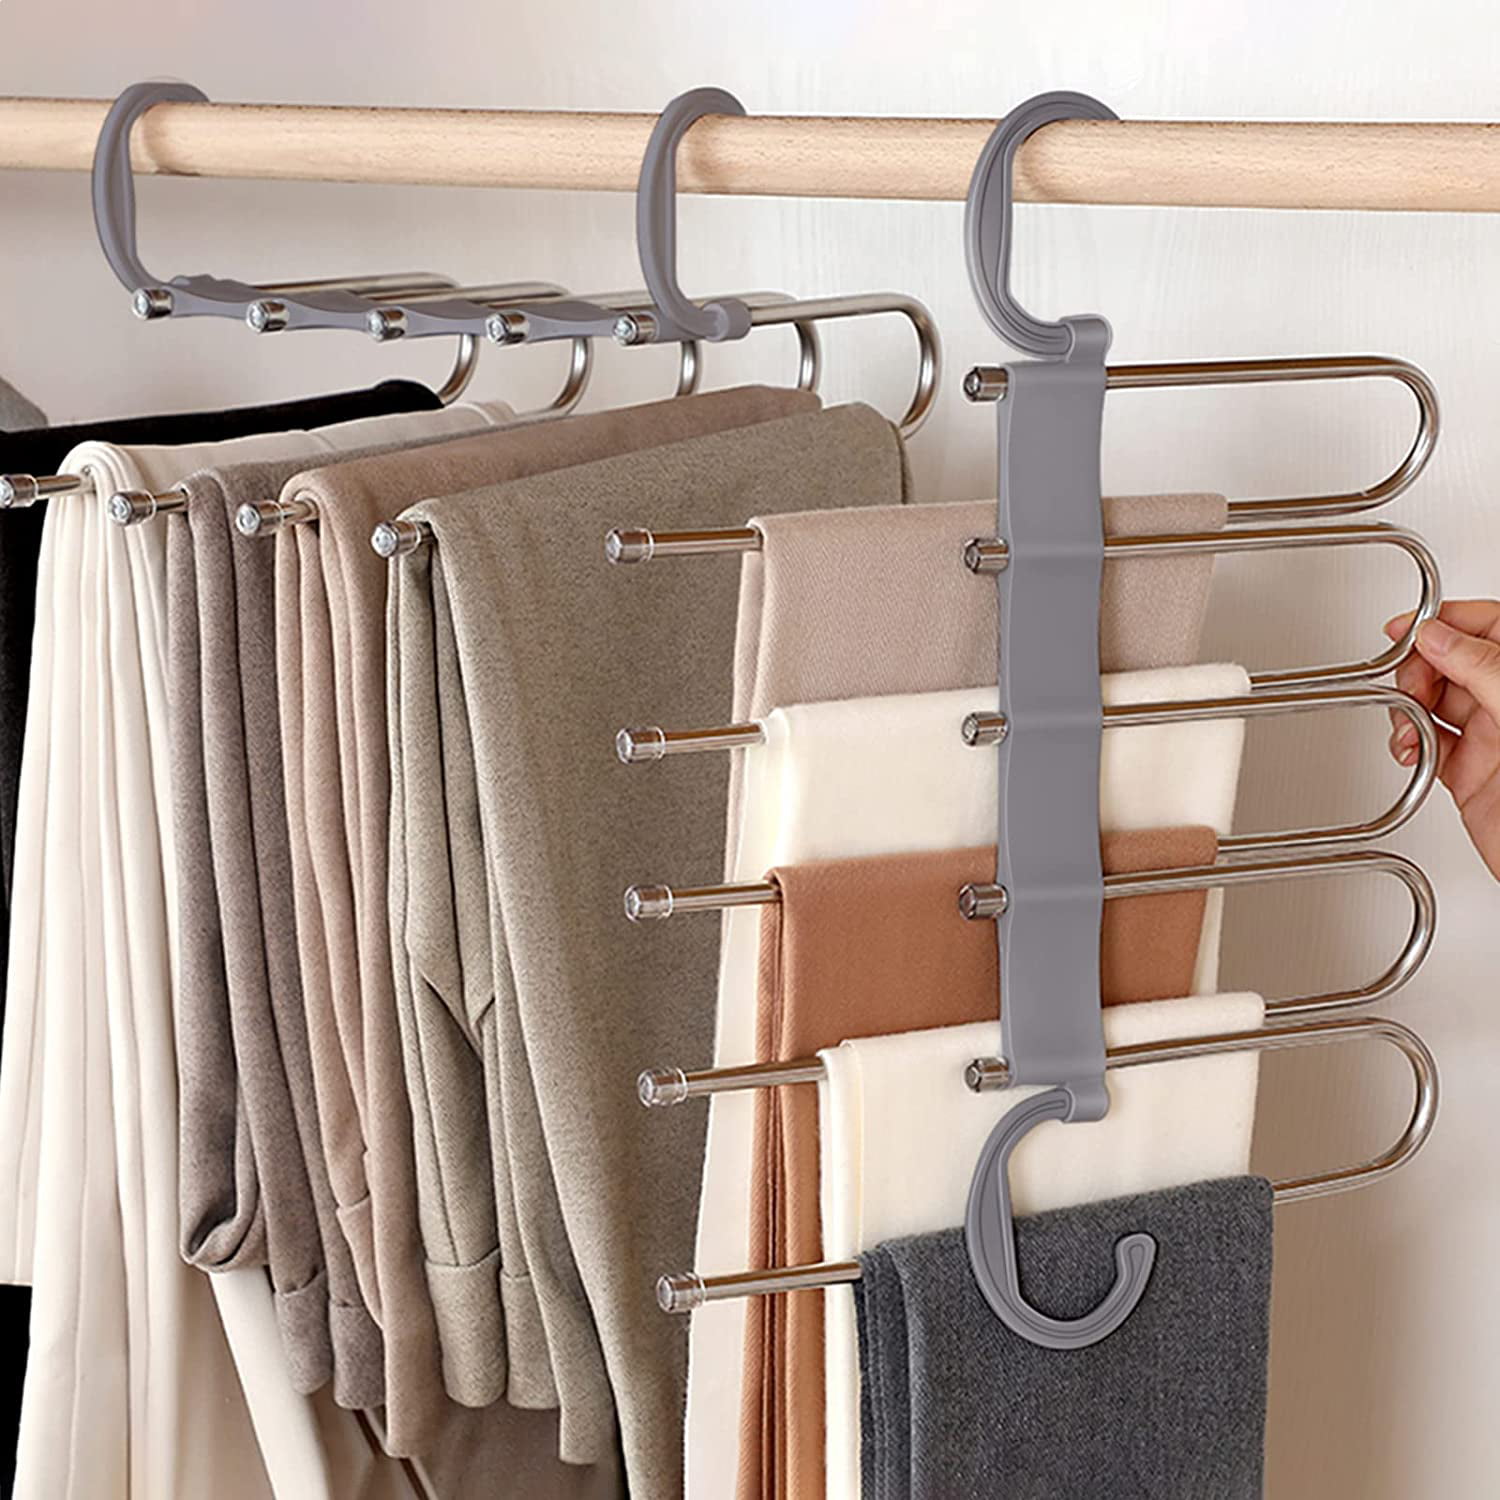 Pants Hangers Durable Slack Hangers Multi Layers Stainless Steel Space Saving Clothes Hangers Closet Storage for Jeans Trousers 4 Pack